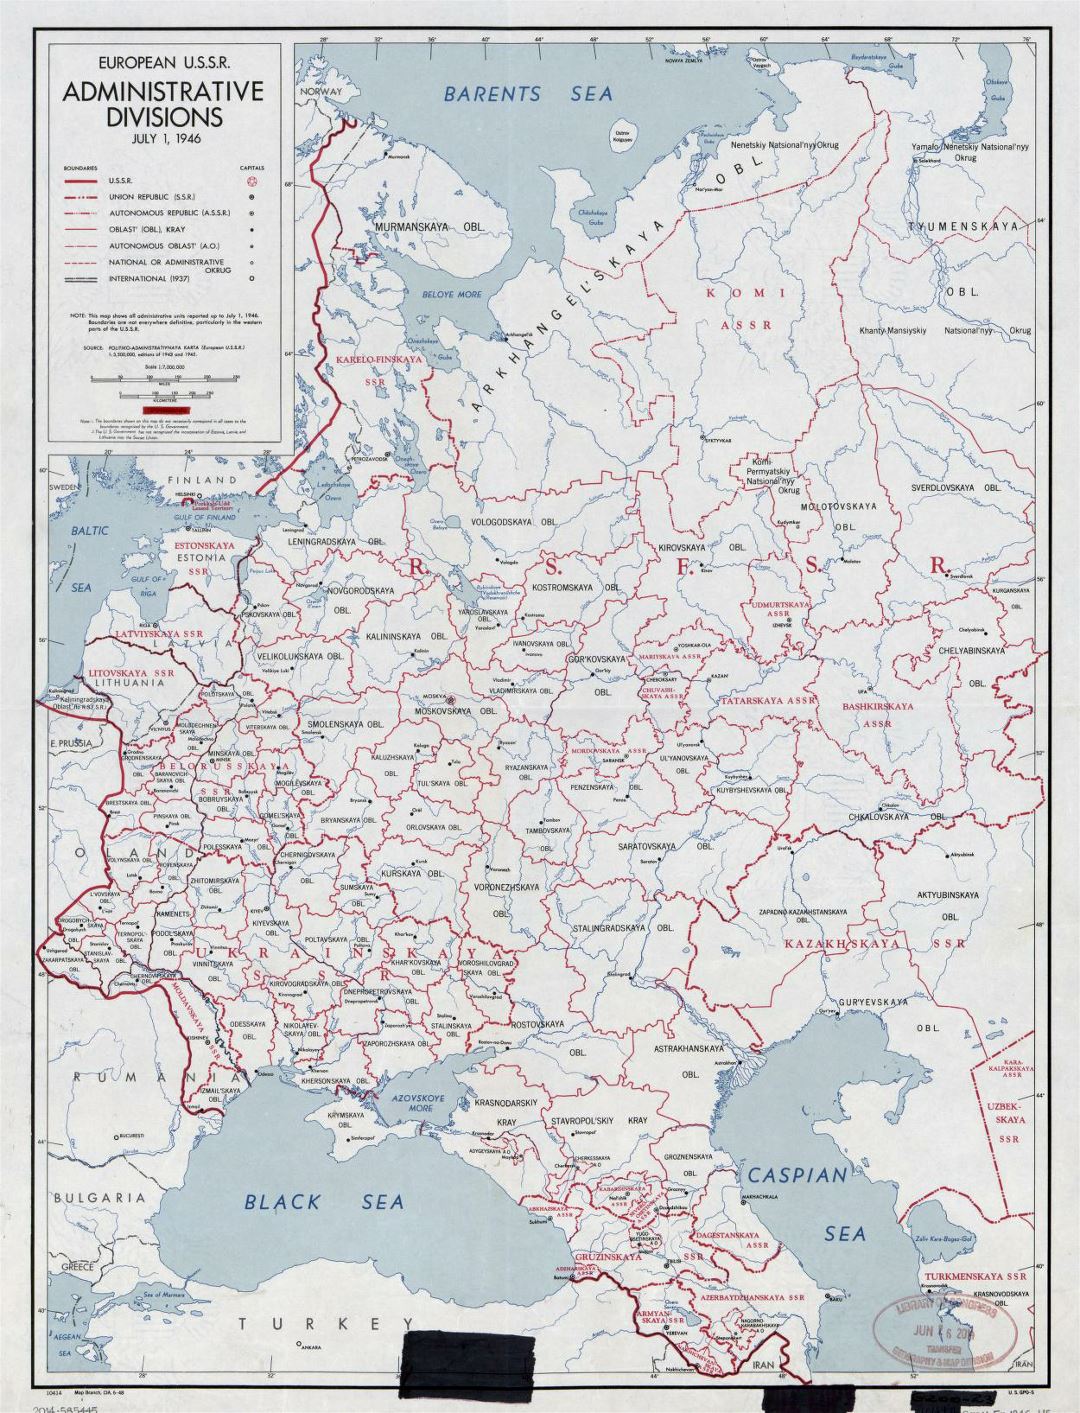 Detailed old administrative divisions map of European U.S.S.R. - 1946